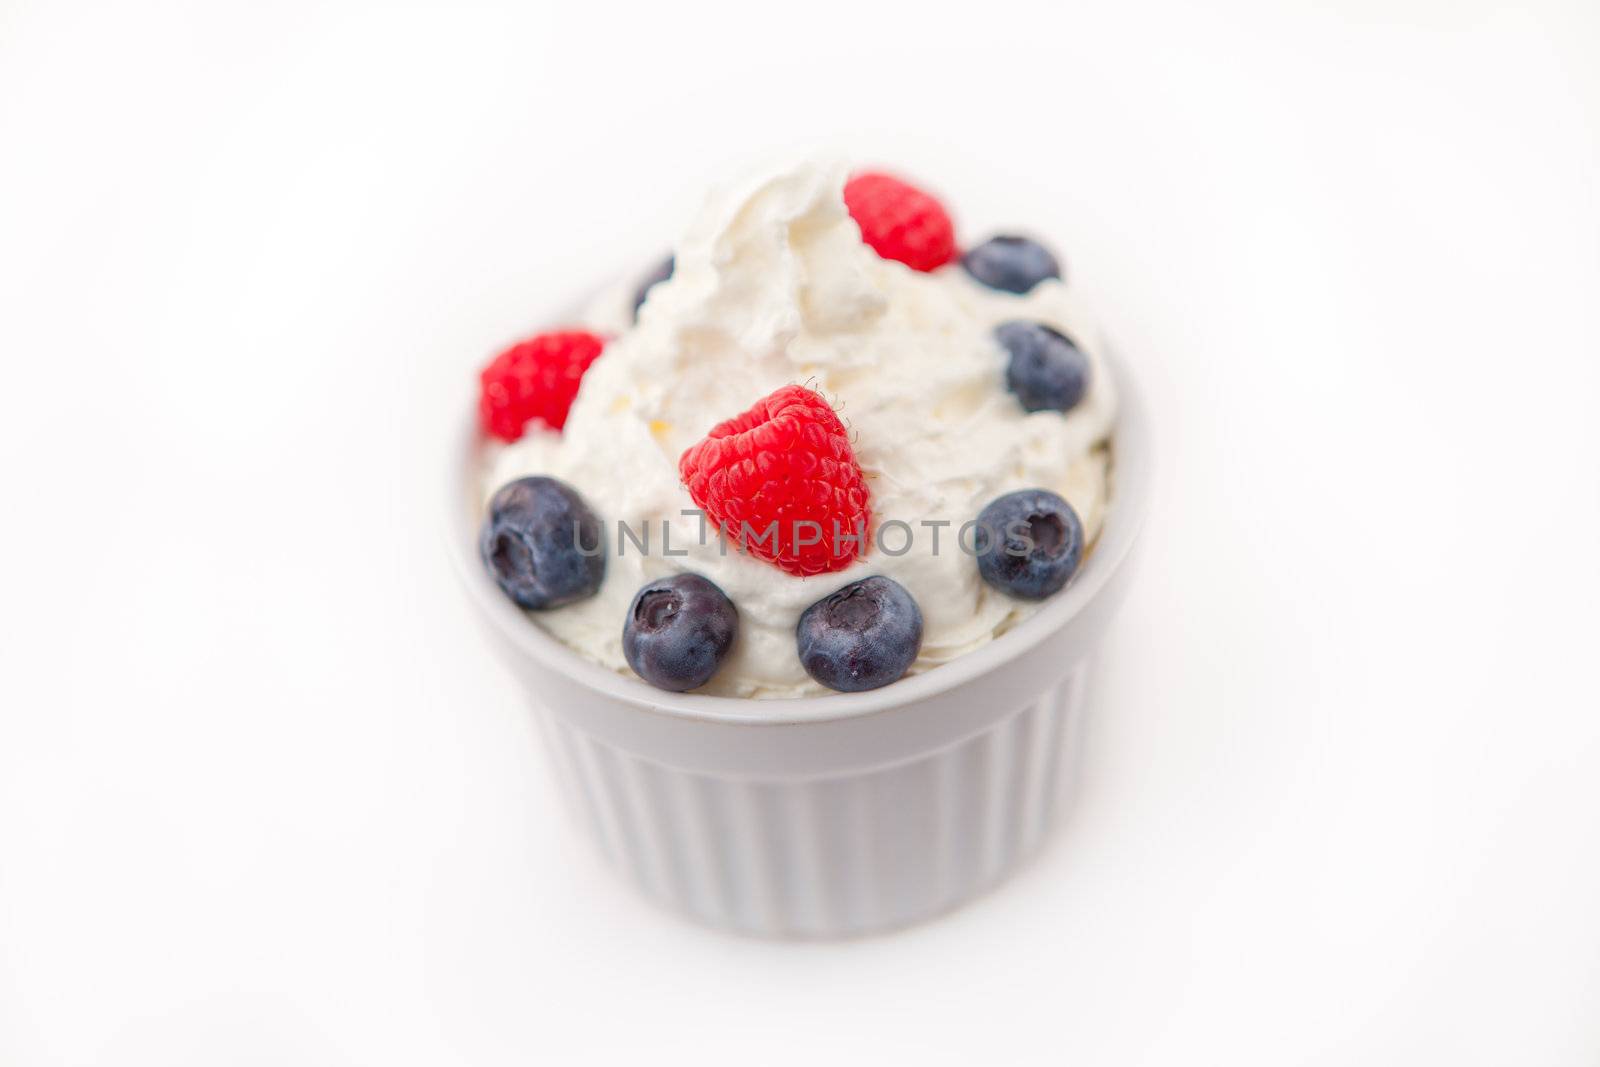 Jar of fruits and whipped cream against white background